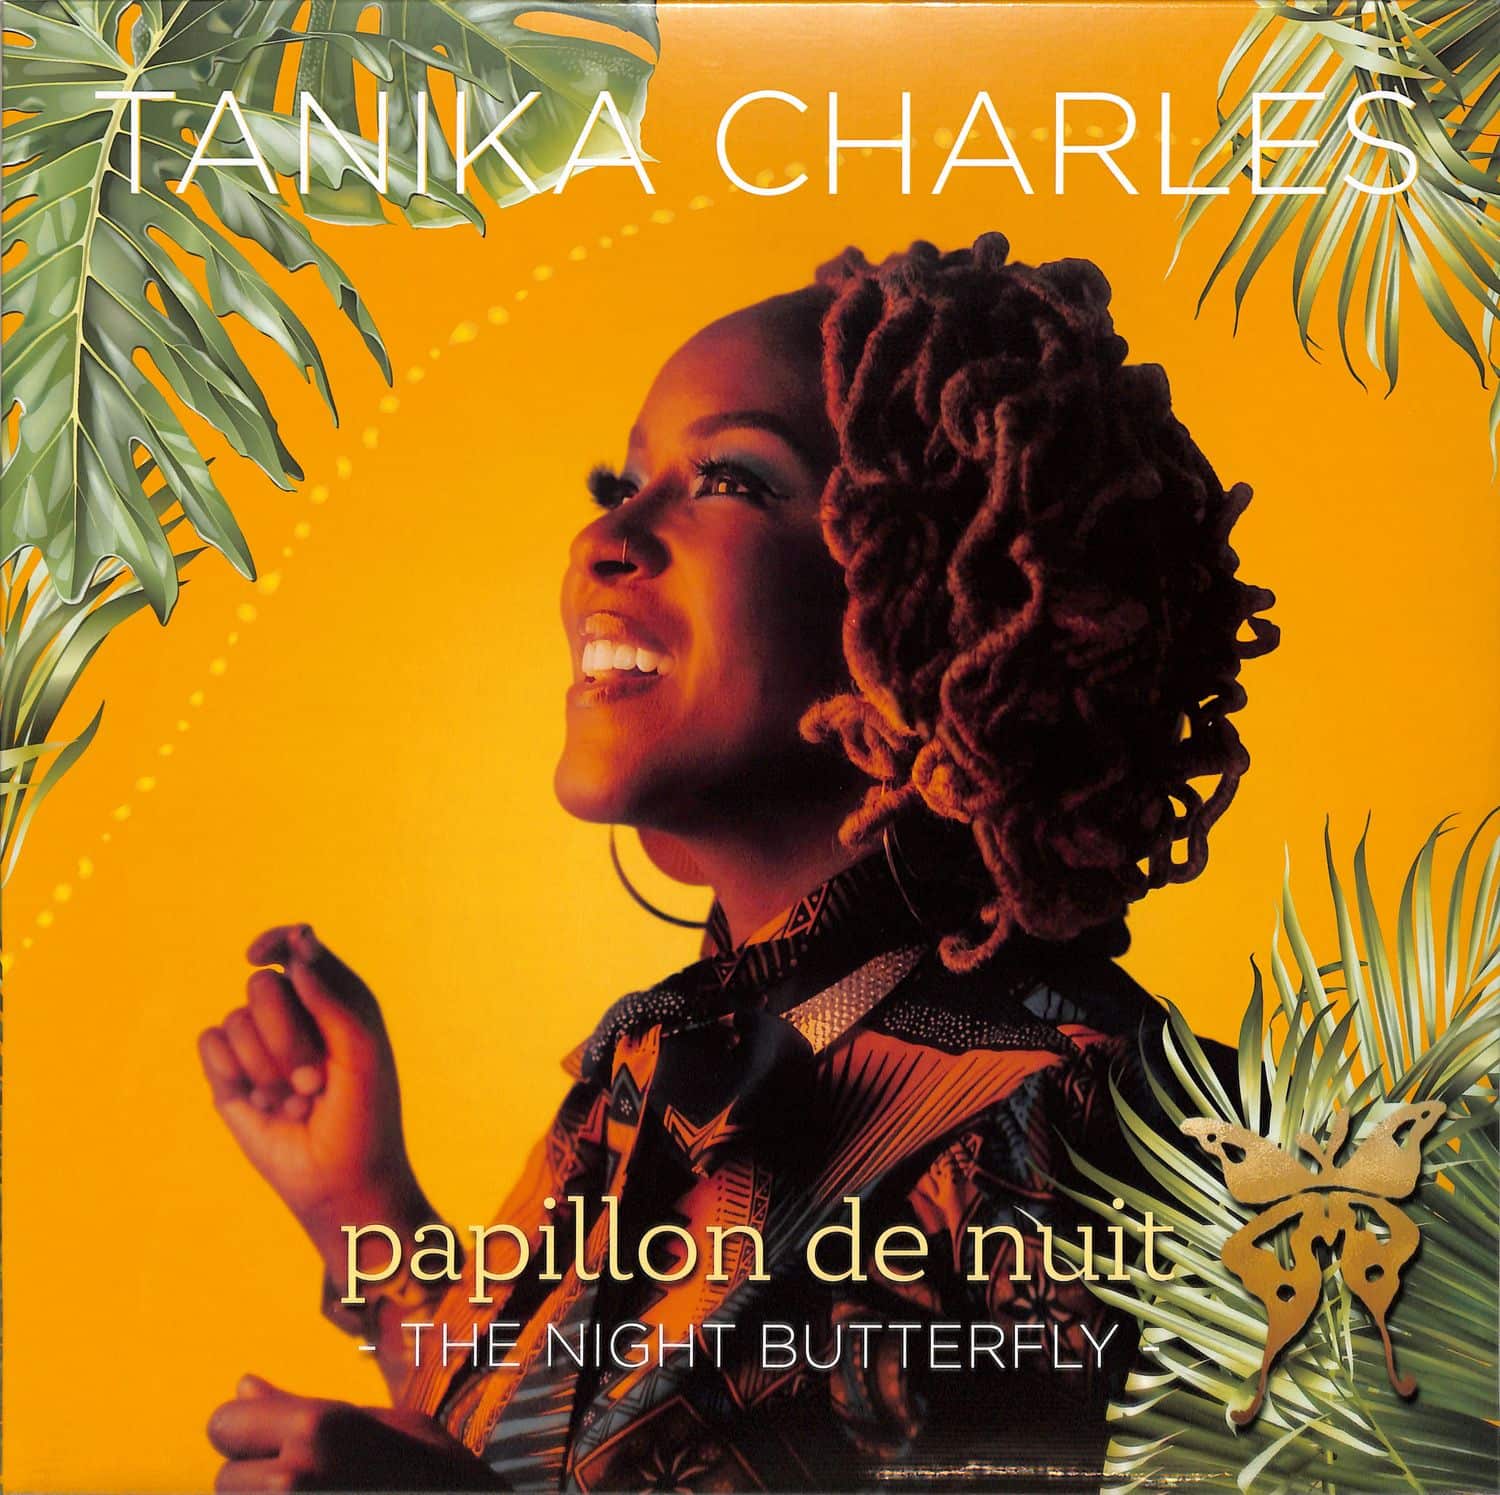 Tanika Charles - PAPILLON DE NUIT: THE NIGHT BUTTERFLY 